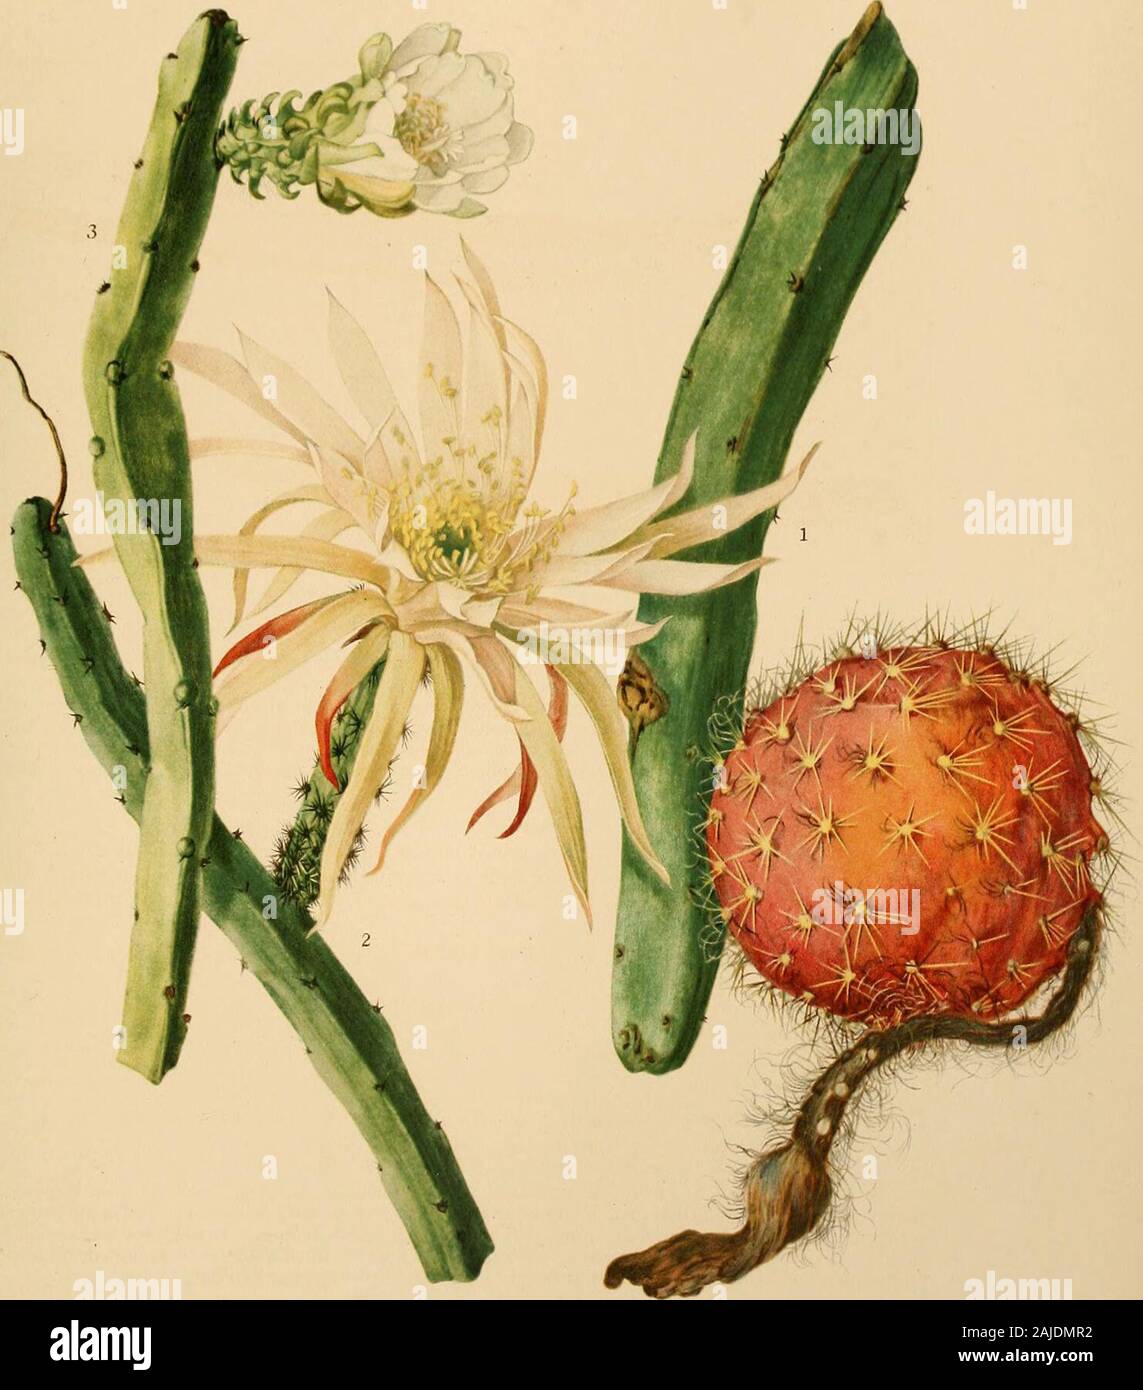 The Cactaceae : descriptions and illustrations of plants of the cactus family . anches terete or slightly angled 2. W. biolleyi Inner perianth-segments white 3. W. panamensis 1. Weberocereus tunilla (Weber) Britton and Rose, Contr. U. S. Nat. Herb. 12: 432. 1909. Cereus tunilla Weber, Bull. Mus. Hist. Nat. Paris 8: 460. 1902.Cereus gonzalezii Weber, Bull. Mus. Hist. Nat. Paris 8: 460. 1902. Stems climbing, 5 to 12 mm. in diameter, usually strongly 4-angled, rarely 2, 3, or 5-angled,but in juvenile forms nearly terete; spines 6 to 12, stiff, swollen at base, yellowish at first, soon brown,6 to Stock Photo